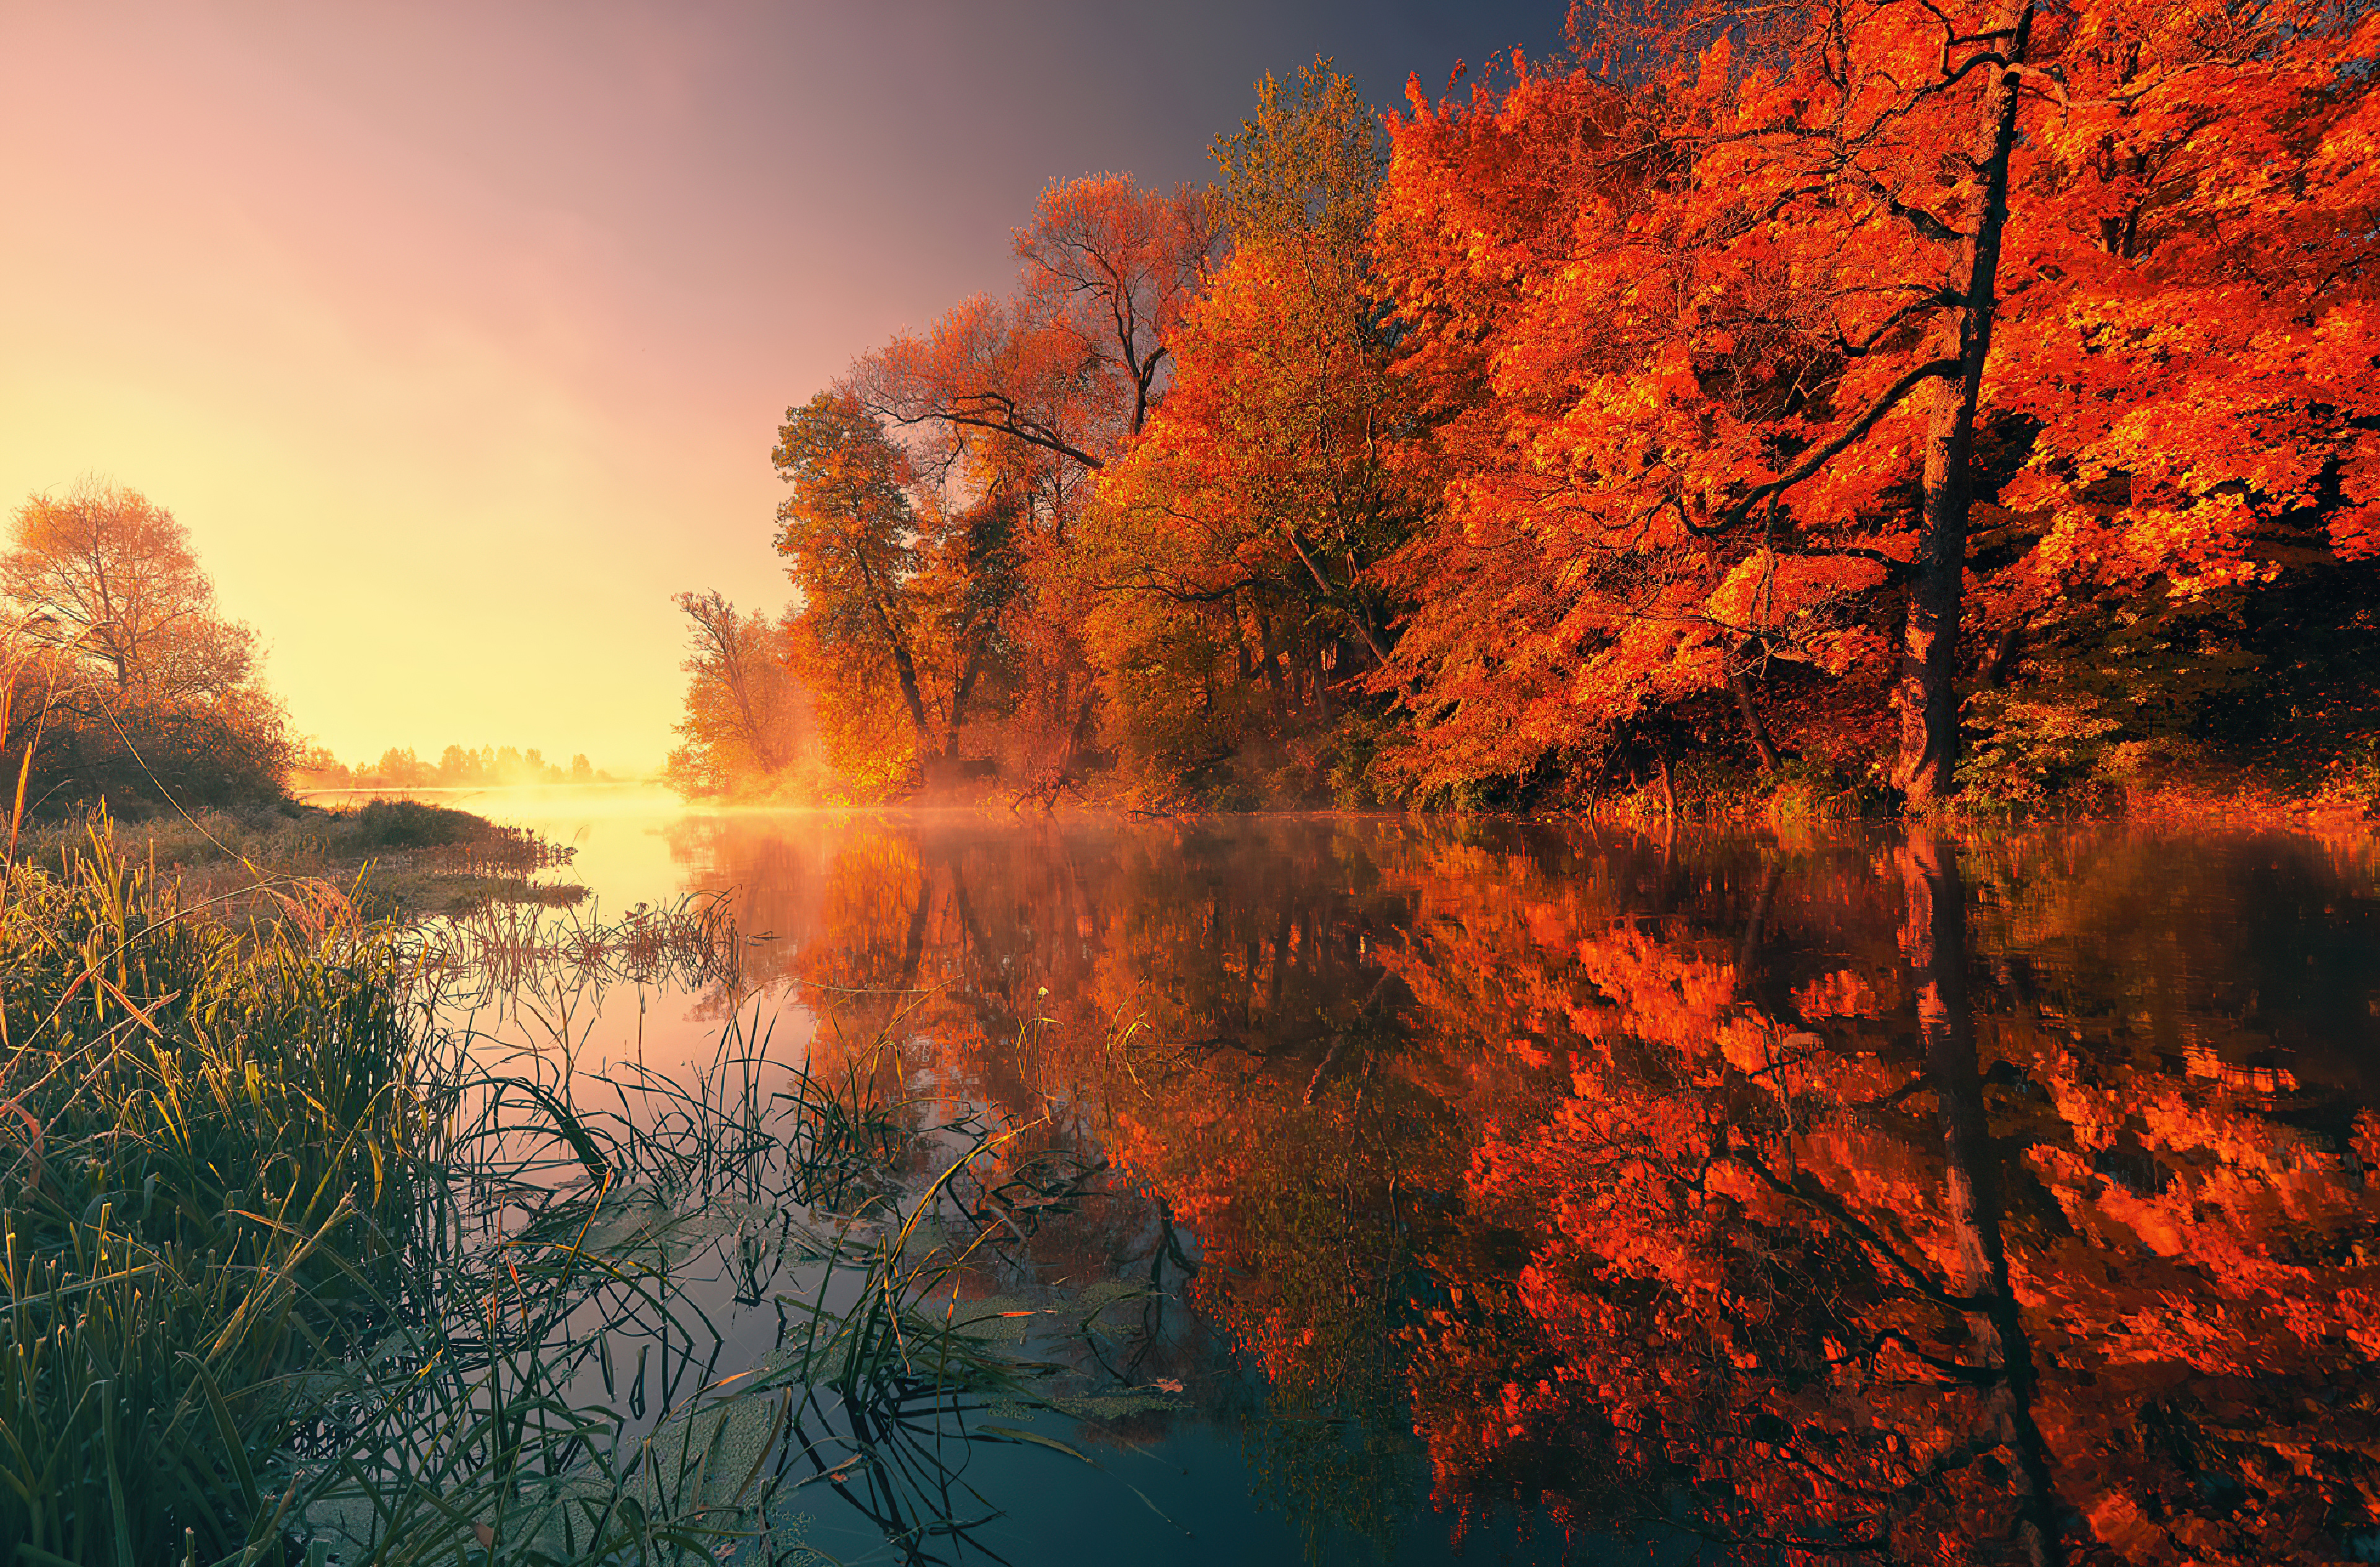 Autumn Reflection Wallpapers